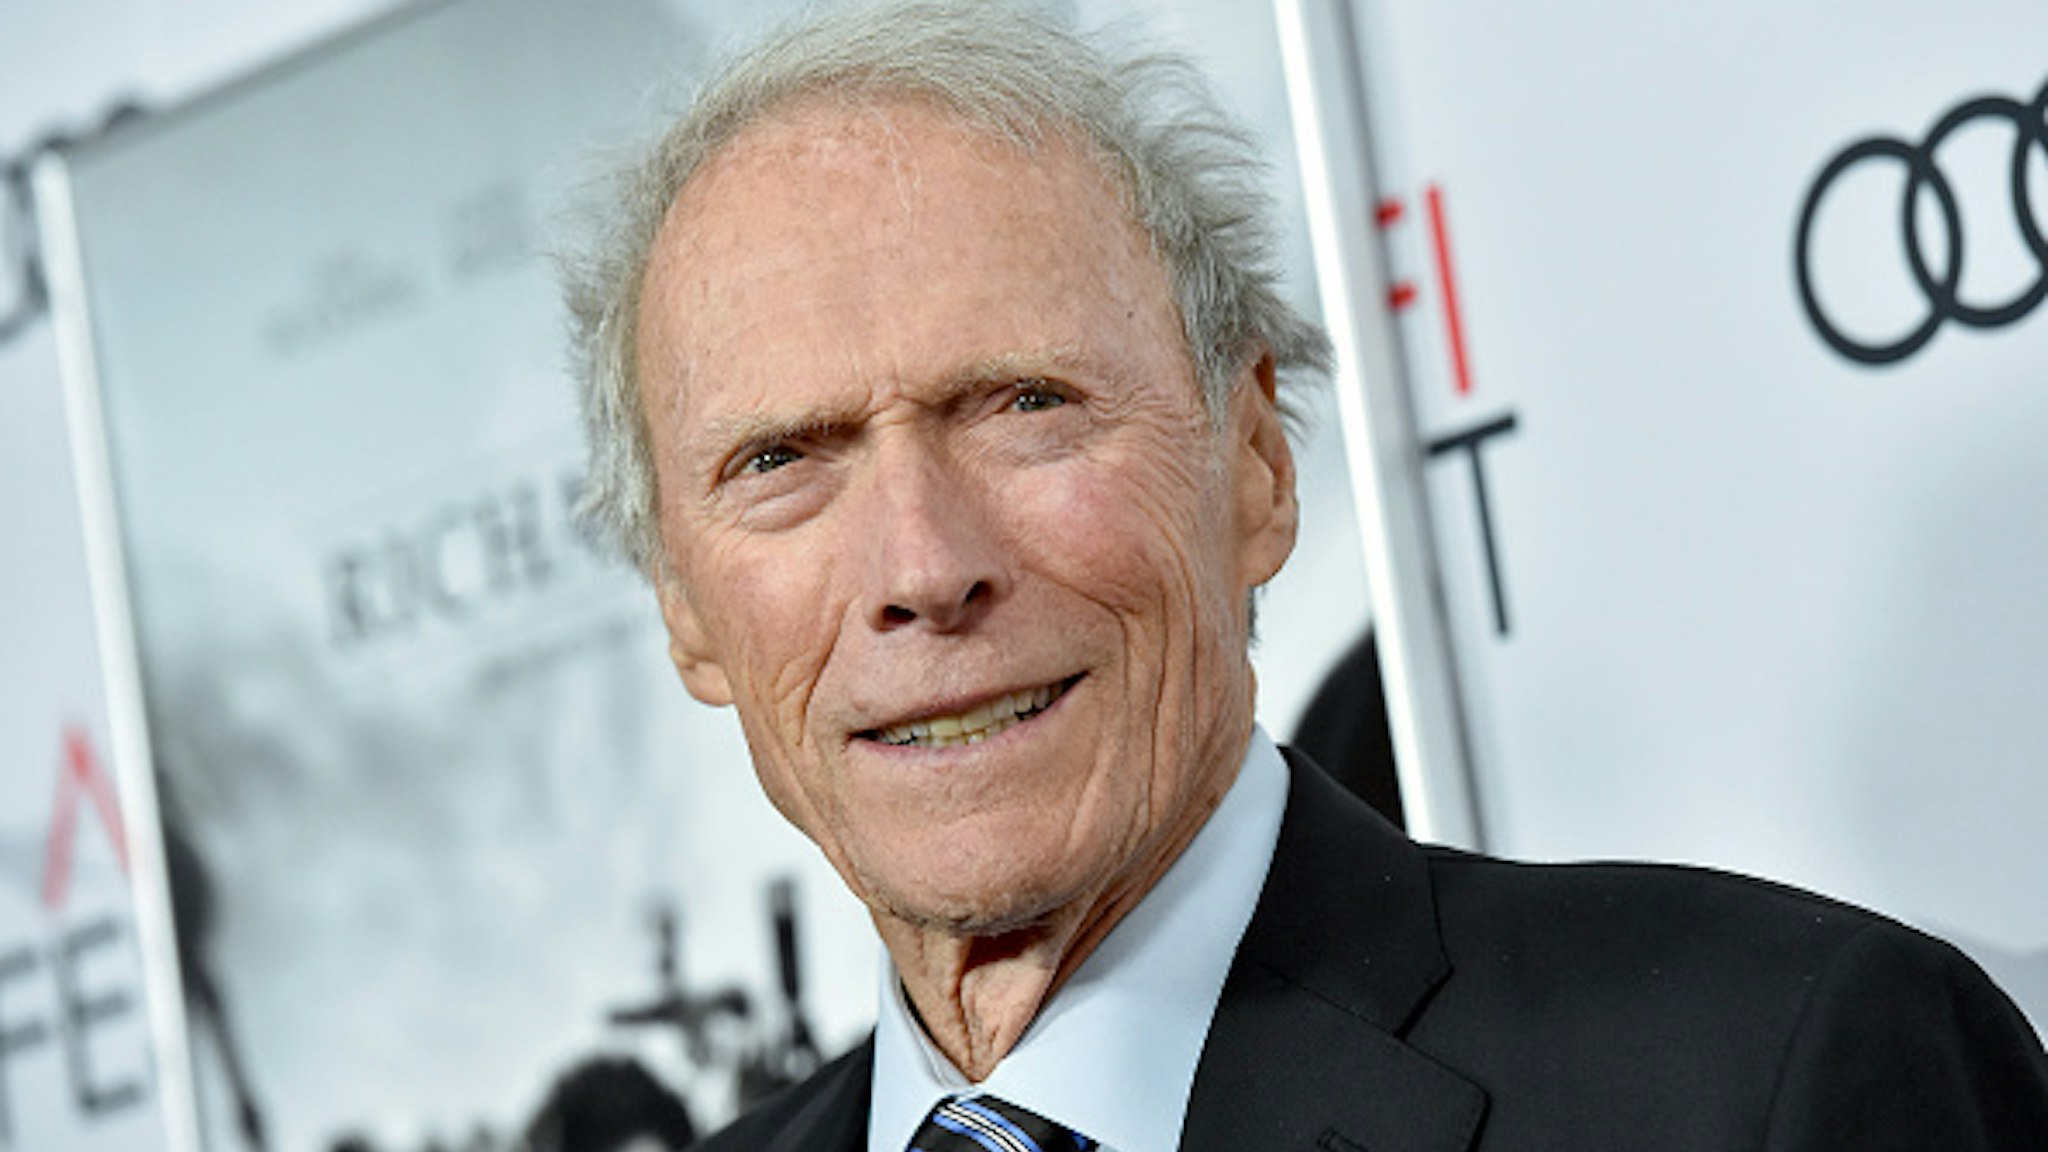 HOLLYWOOD, CALIFORNIA - NOVEMBER 20: Clint Eastwood attends the premiere of "Richard Jewell" during AFI FEST 2019 presented by Audi at TCL Chinese Theatre on November 20, 2019 in Hollywood, California.